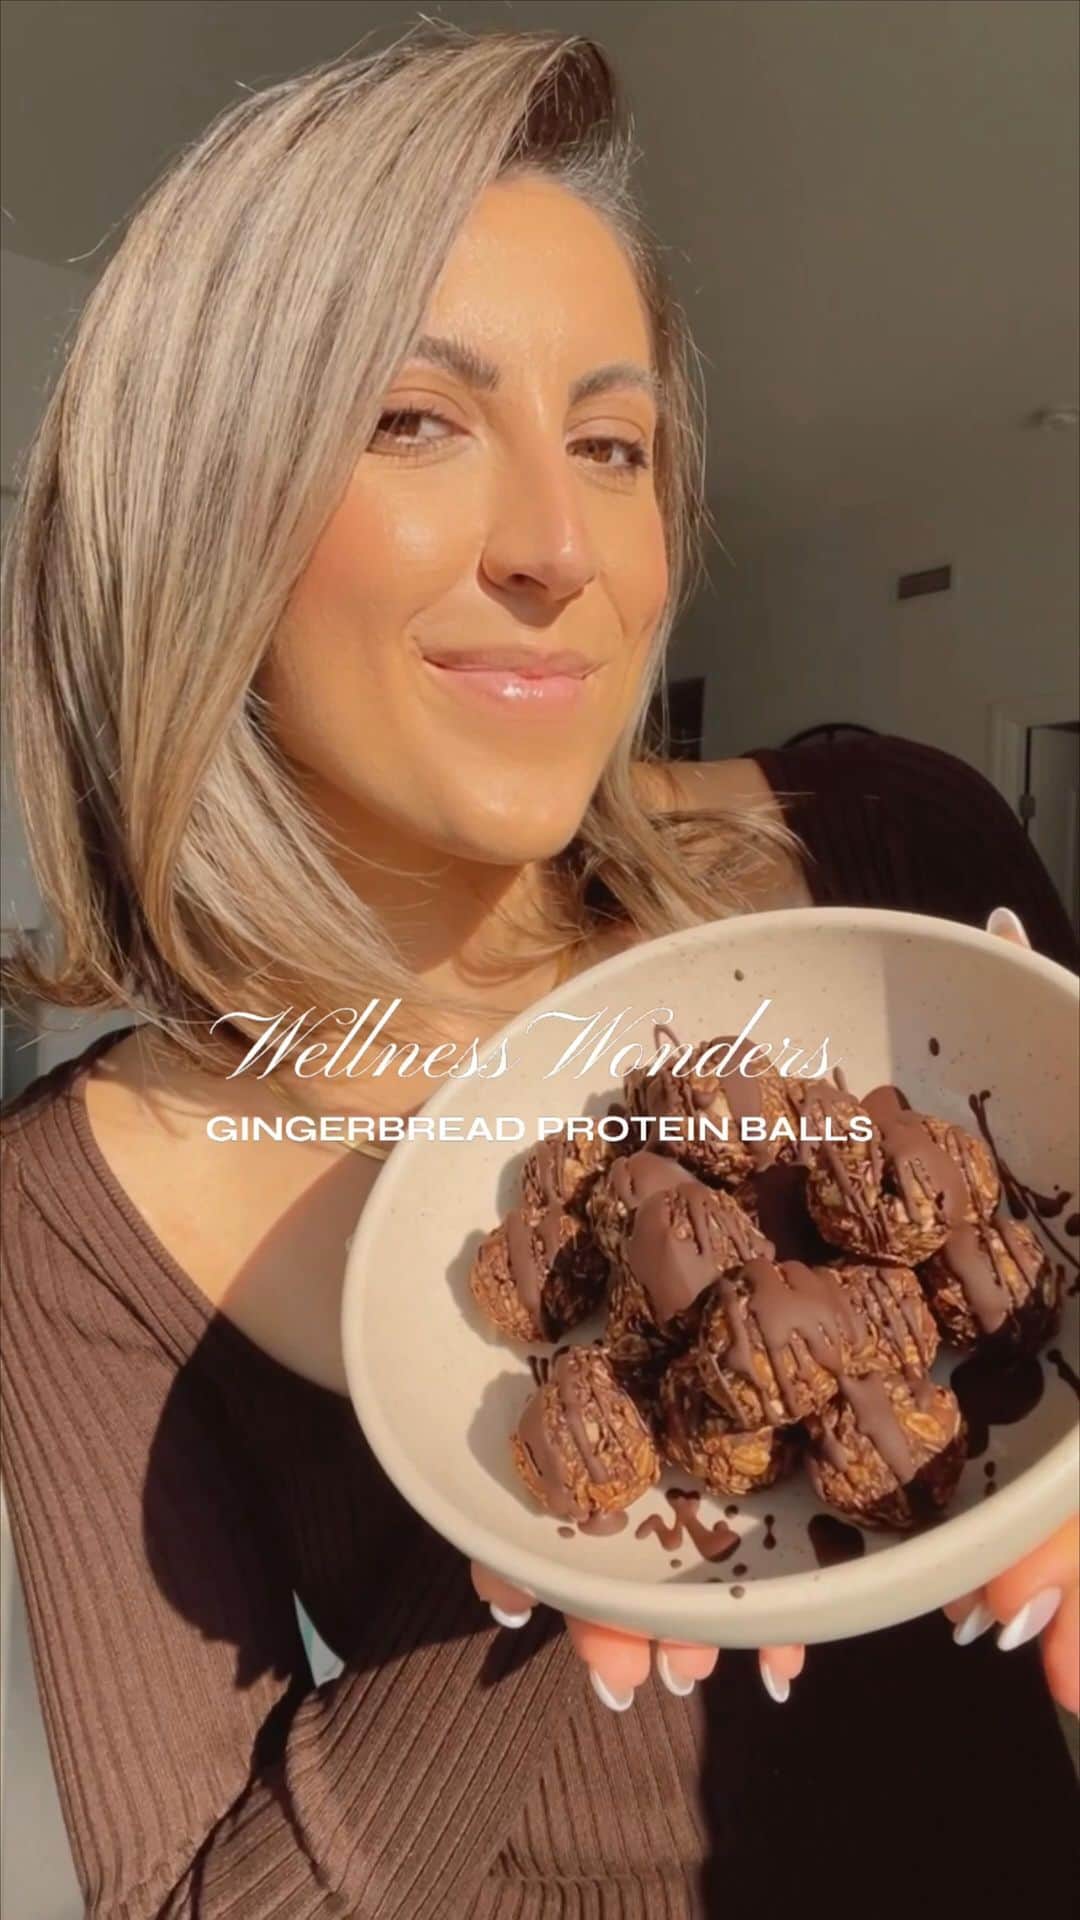 Stephanie Sterjovskiのインスタグラム：「RECIPE HERE 👇✨  My #WellnessWonders series is back for a 2nd time and this year I’m excited to bring you more nourishing recipes, treats and holistic tips to keep wellness a priority during the busy holiday season 🎄  The holidays are filled with treats (and while I don’t restrict and enjoy those foods in moderation) I do prefer refined sugar feee snacks to fuel me. Prioritizing protein any time I can to support my mood, blood sugar, energy levels and hormones is the move.  Enter: GINGERBREAD PROTEIN BALLS 😍👏  Combine all of these ingredients in a bowl:  1 cup gluten-free oats 2 scoops chocolate protein powder (I use @atplabs dark chocolate beef protein powder that’s dairy-free but use what you like) 3 tbsp nut butter of choice 2 tbsp of coconut milk  2 tbsp maple syrup 1 tsp vanilla 1/2 tsp cinnamon 1/4 tsp ground ginger 1/4 tsp nutmeg 1/4 tsp sea salt  Roll into balls and place in a glass container. Pop these in the fridge for 10 minutes then pull them out and drizzle some melted chocolate (I love @enjoylifefoods chocolate). Pop them back in the fridge for a few minutes and then enjoy!!   I keep these in the fridge and pop one in my mouth whenever I’m craving a little chocolate fix. These make a great little gift to drop off to a friend or neighbour during the holidays too! 🥰 #holidayrecipes #holidaytreats #healthyholidays #lutealphasesnacks #cyclesyncing #proteinballs」